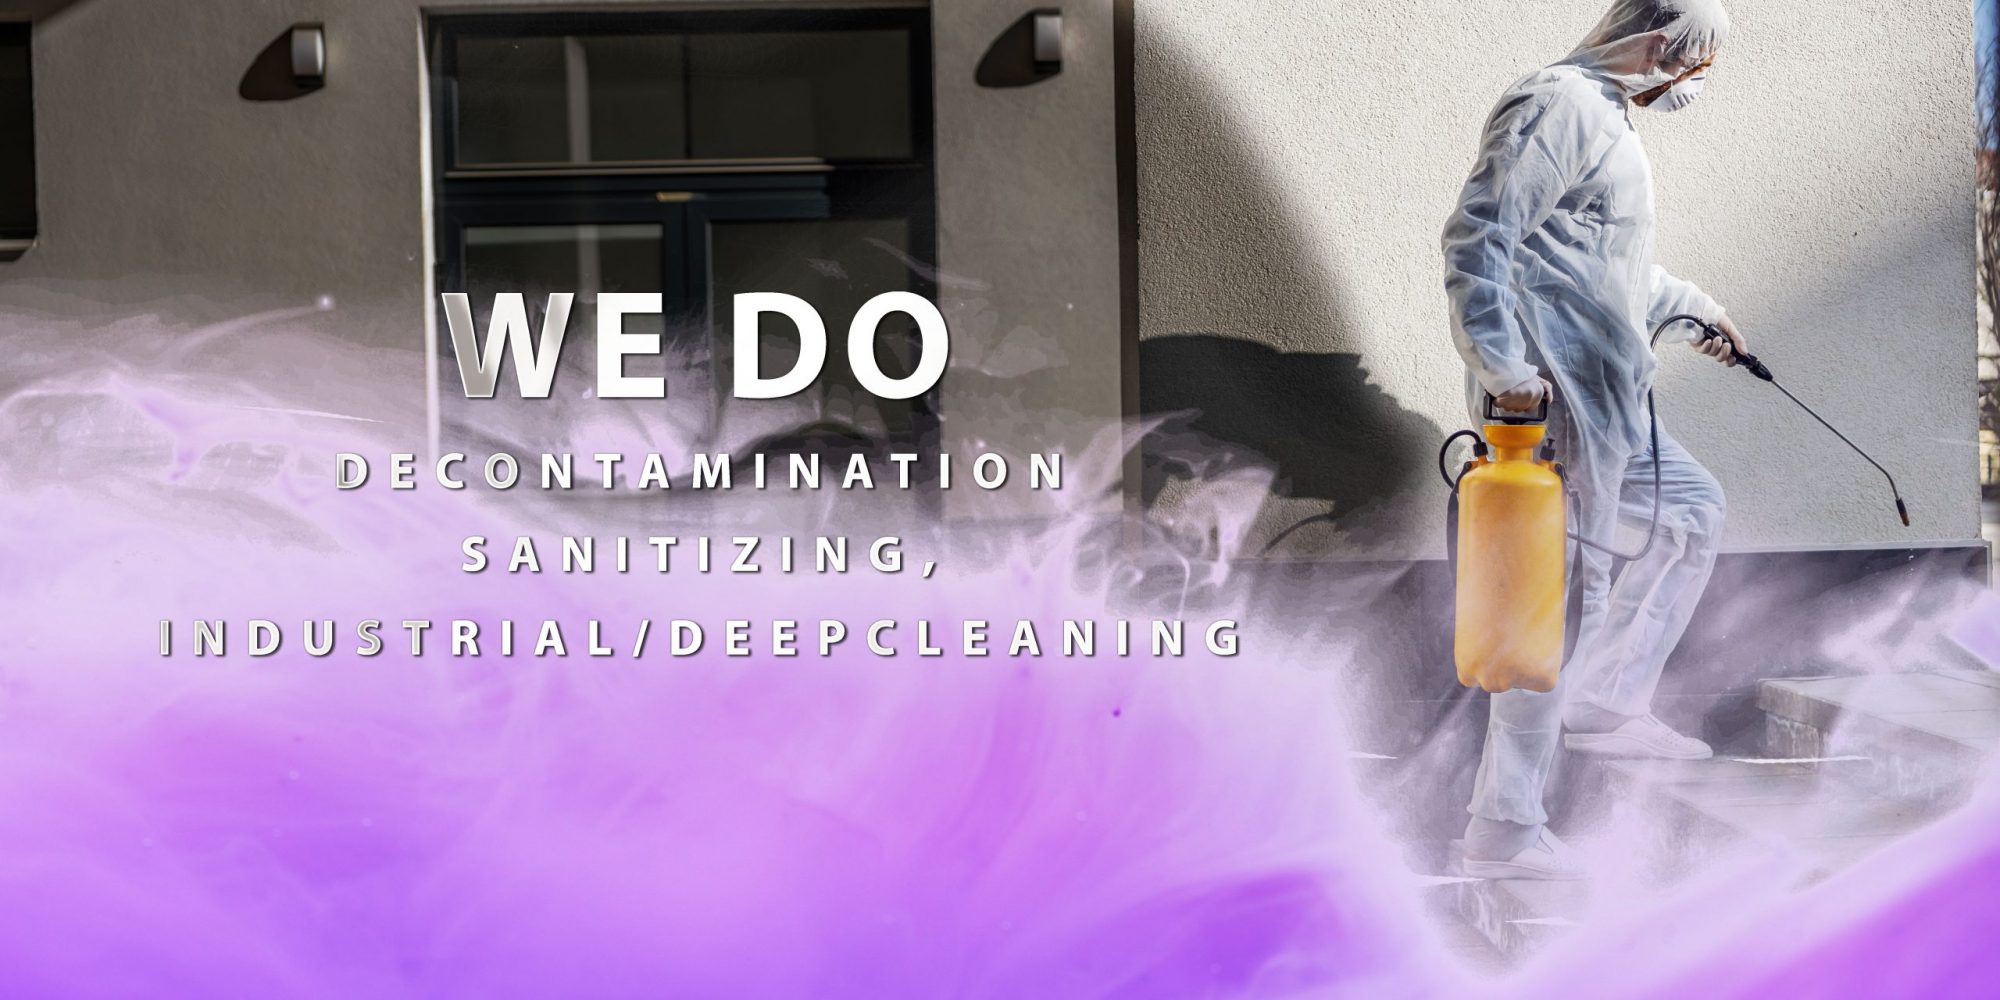 Cleaning and Disinfection outside around buildings, the coronavirus epidemic. Professional teams for disinfection efforts. Infection prevention and control of epidemic. Protective suit and mask.